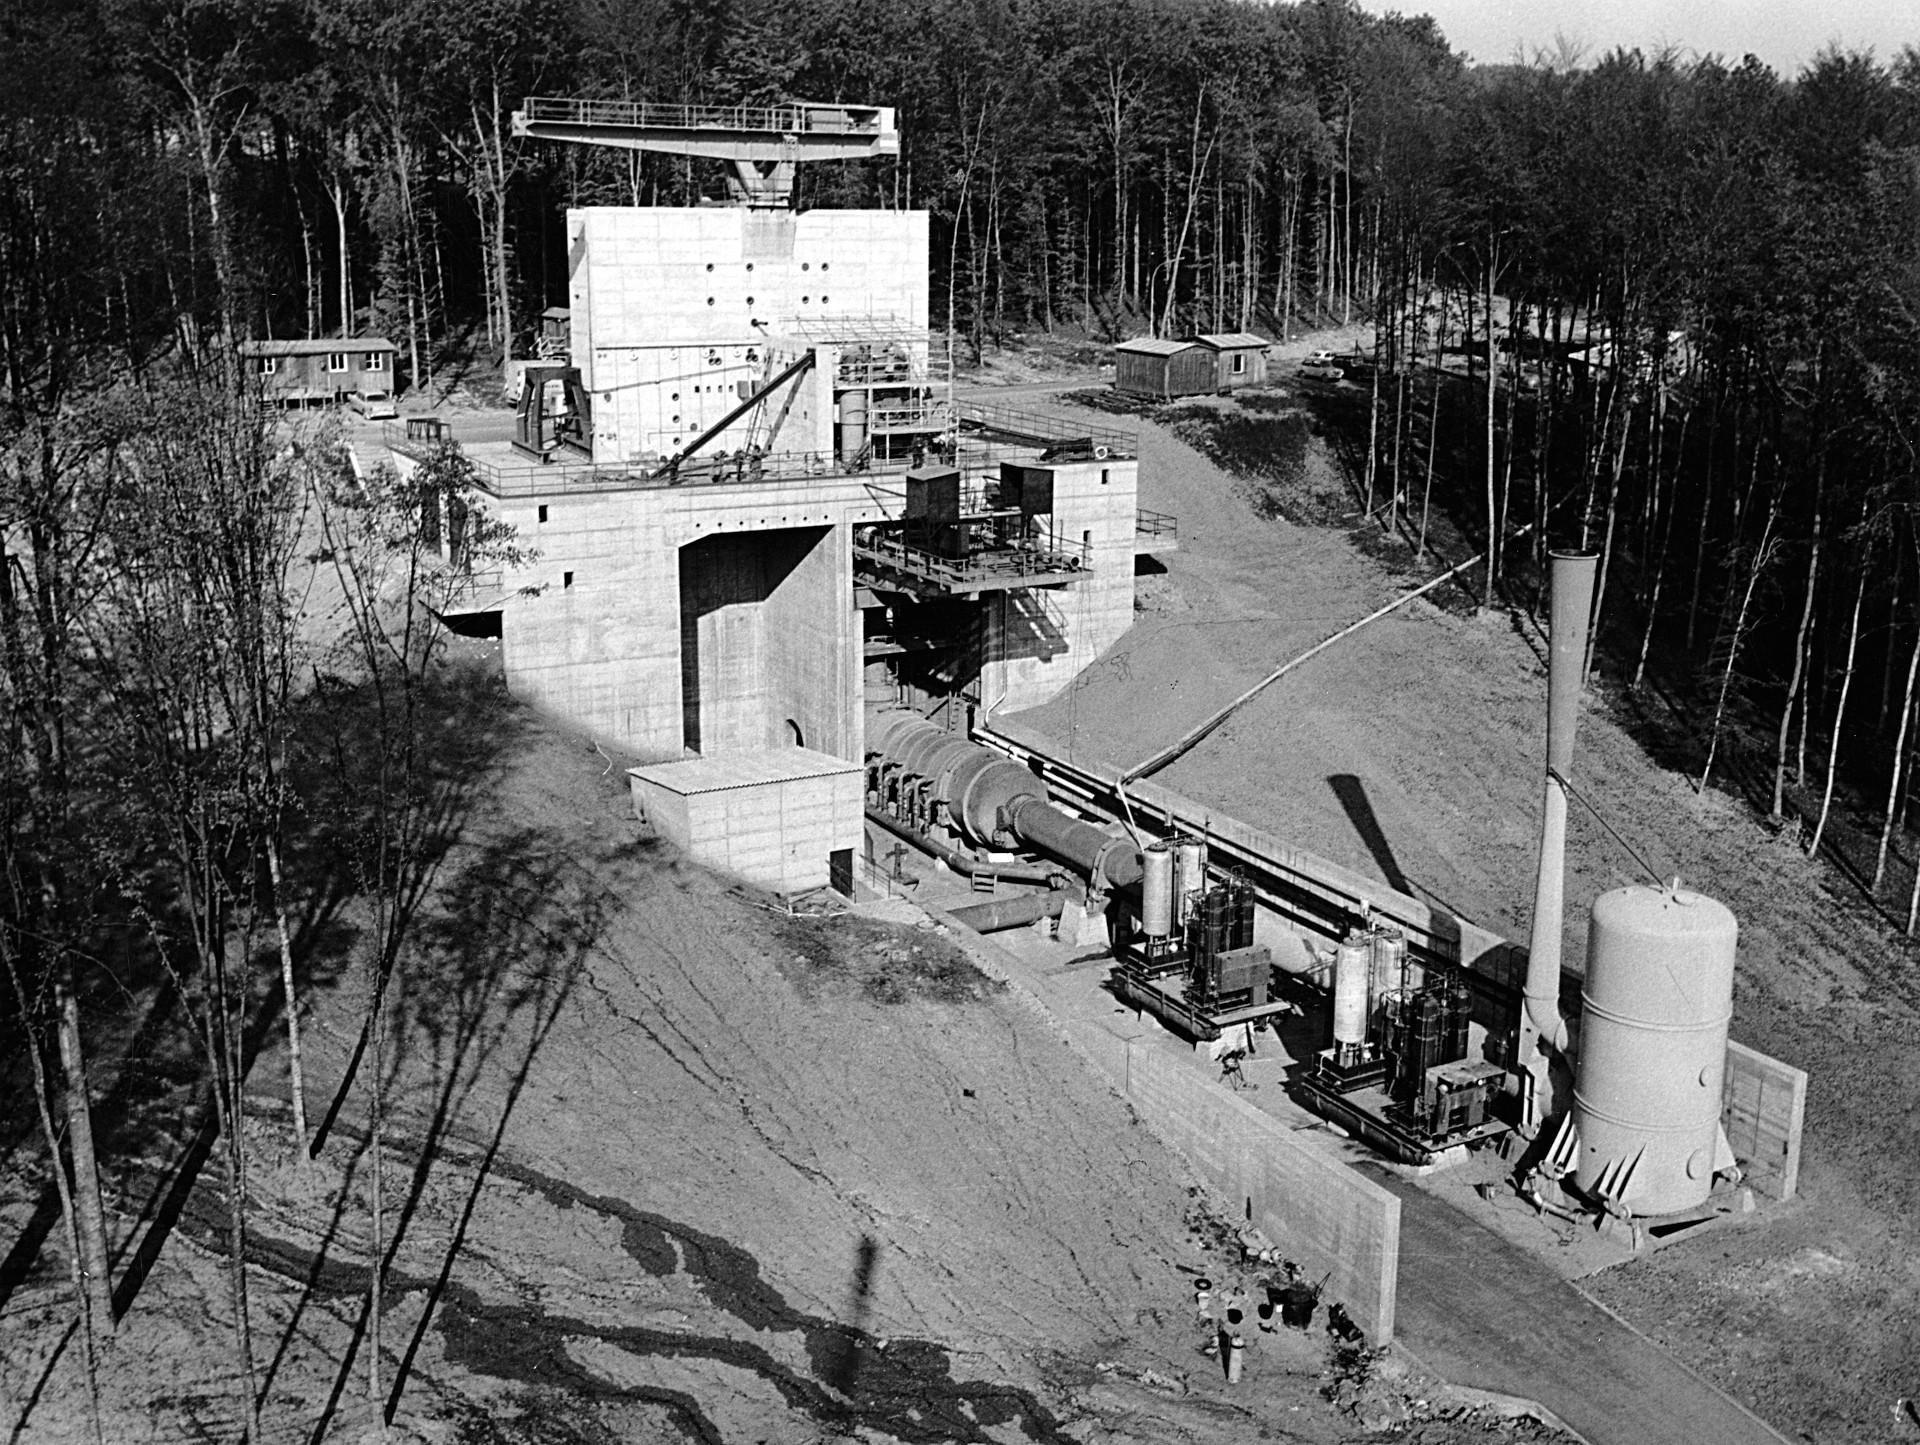 Test facility complex P4 was built between 1964 and 1966